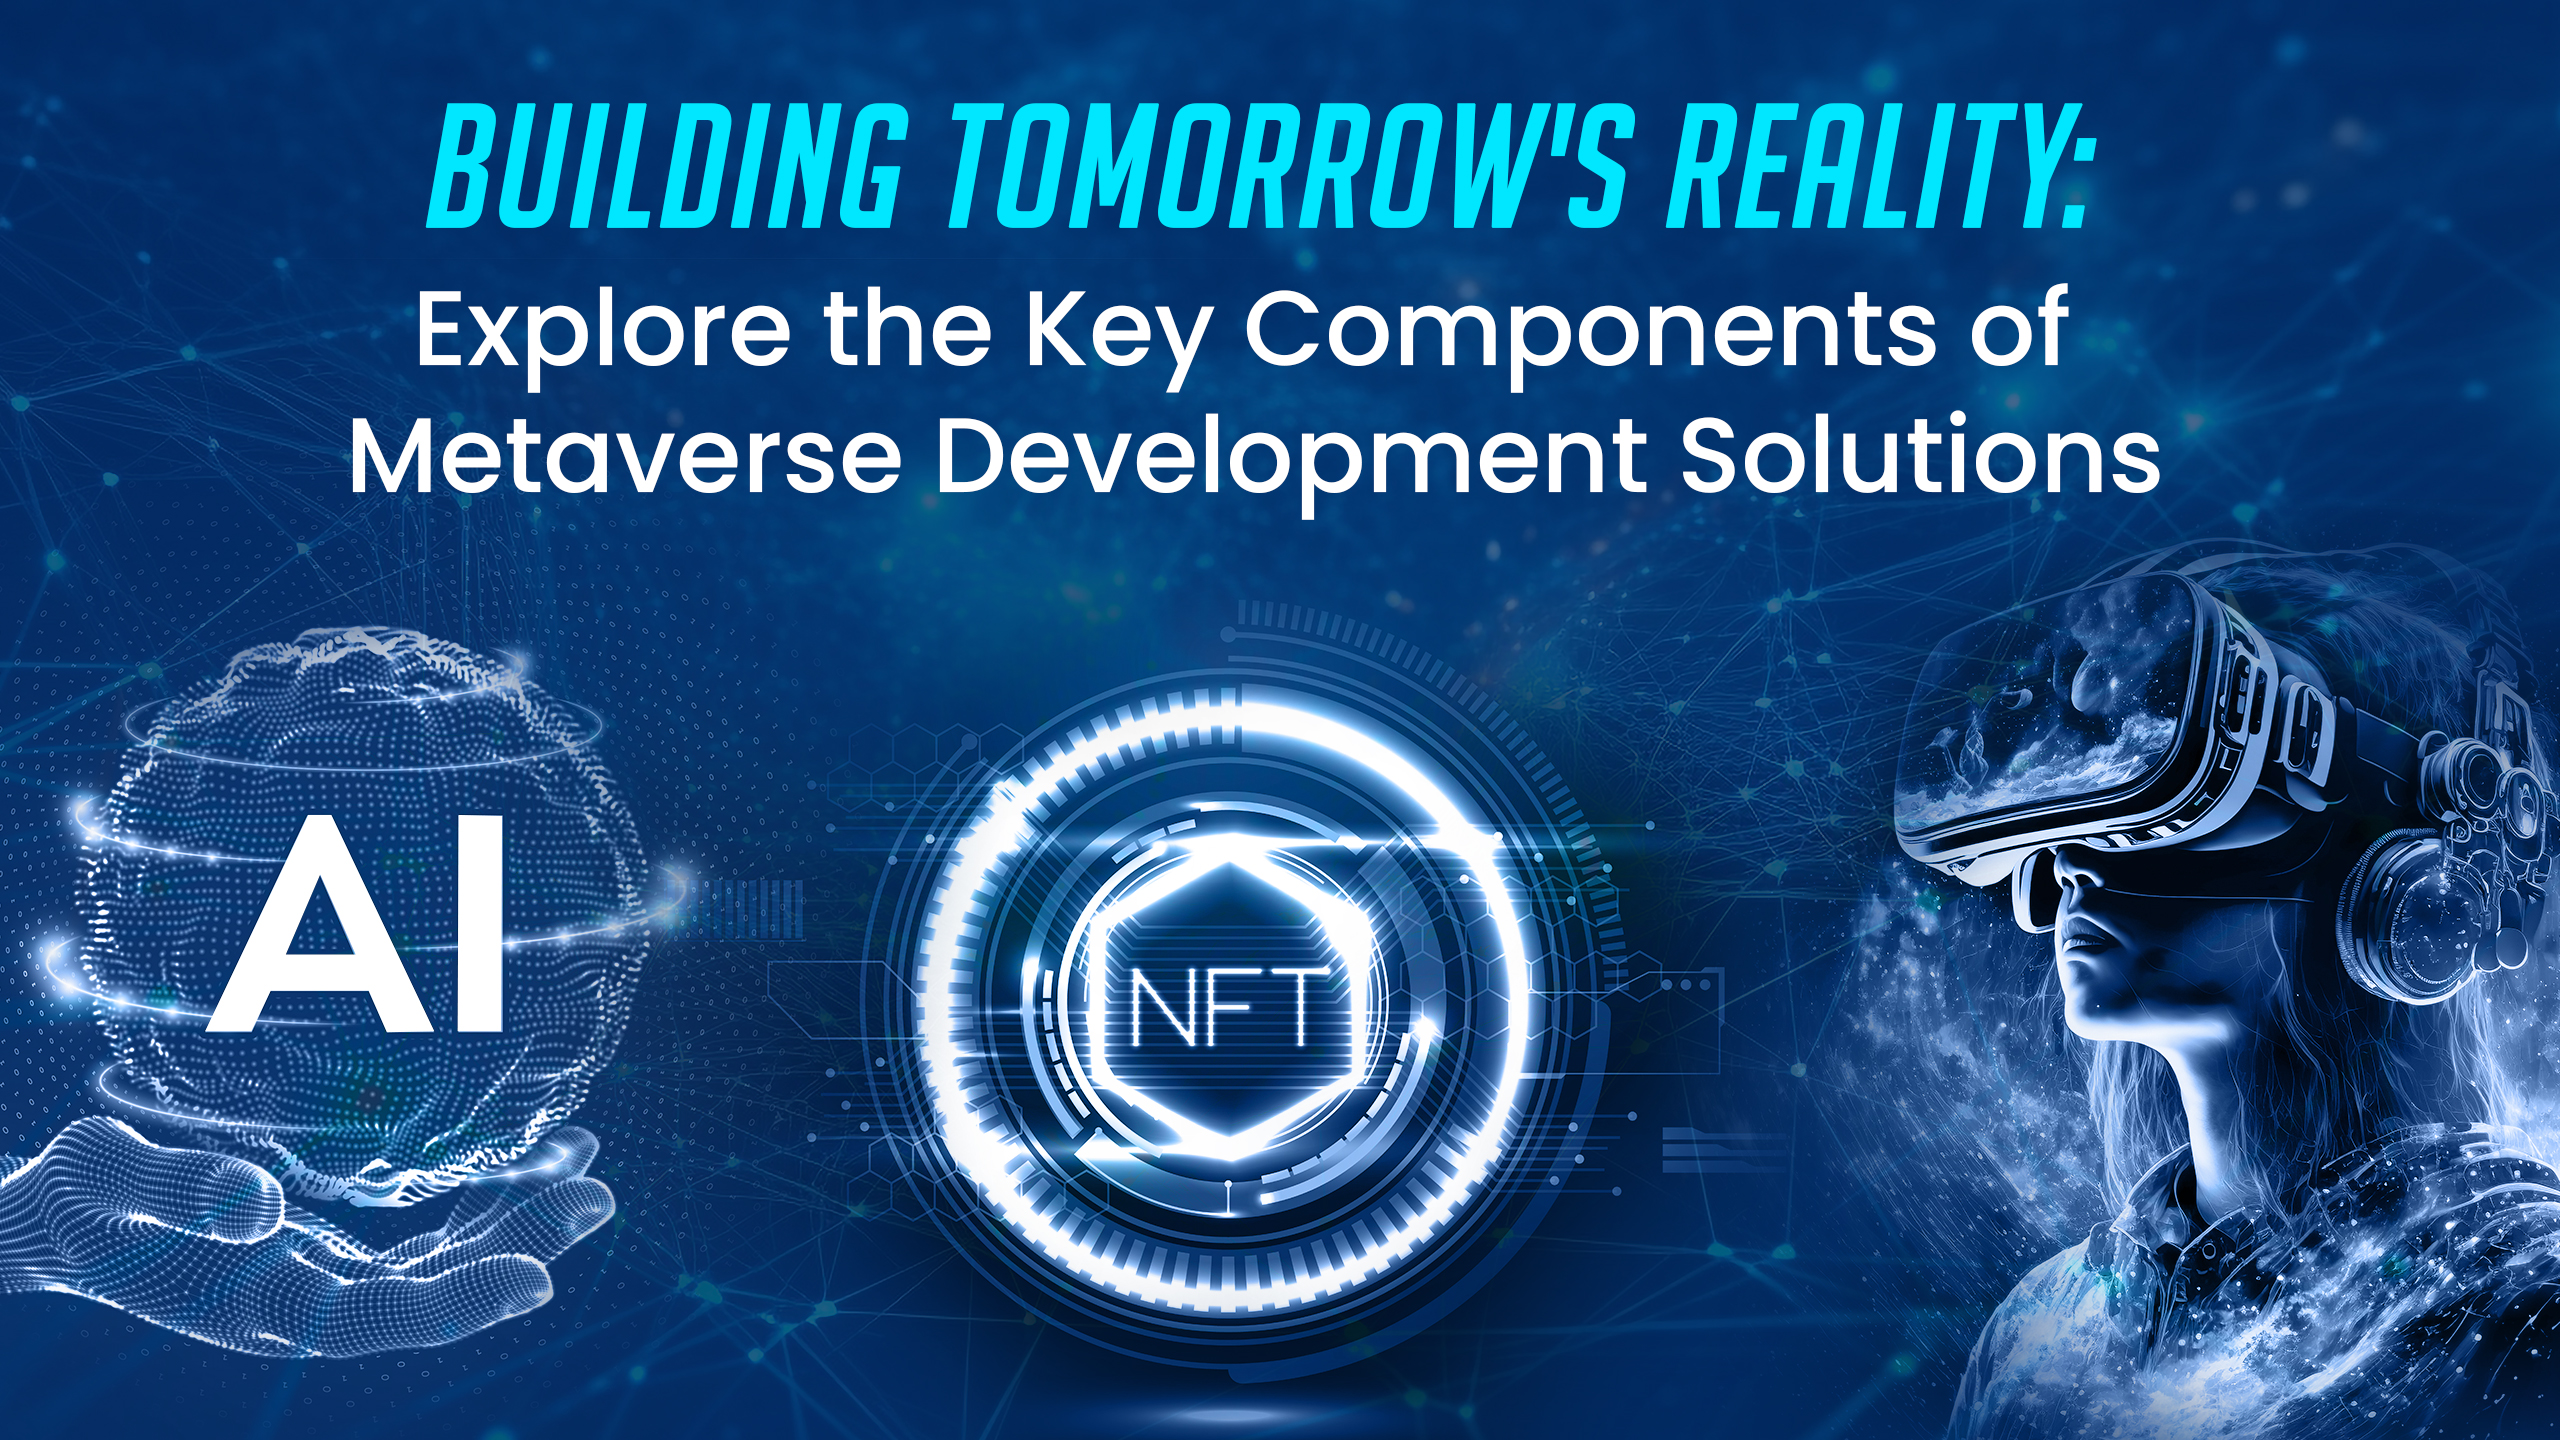 Components of Metaverse Development Solutions